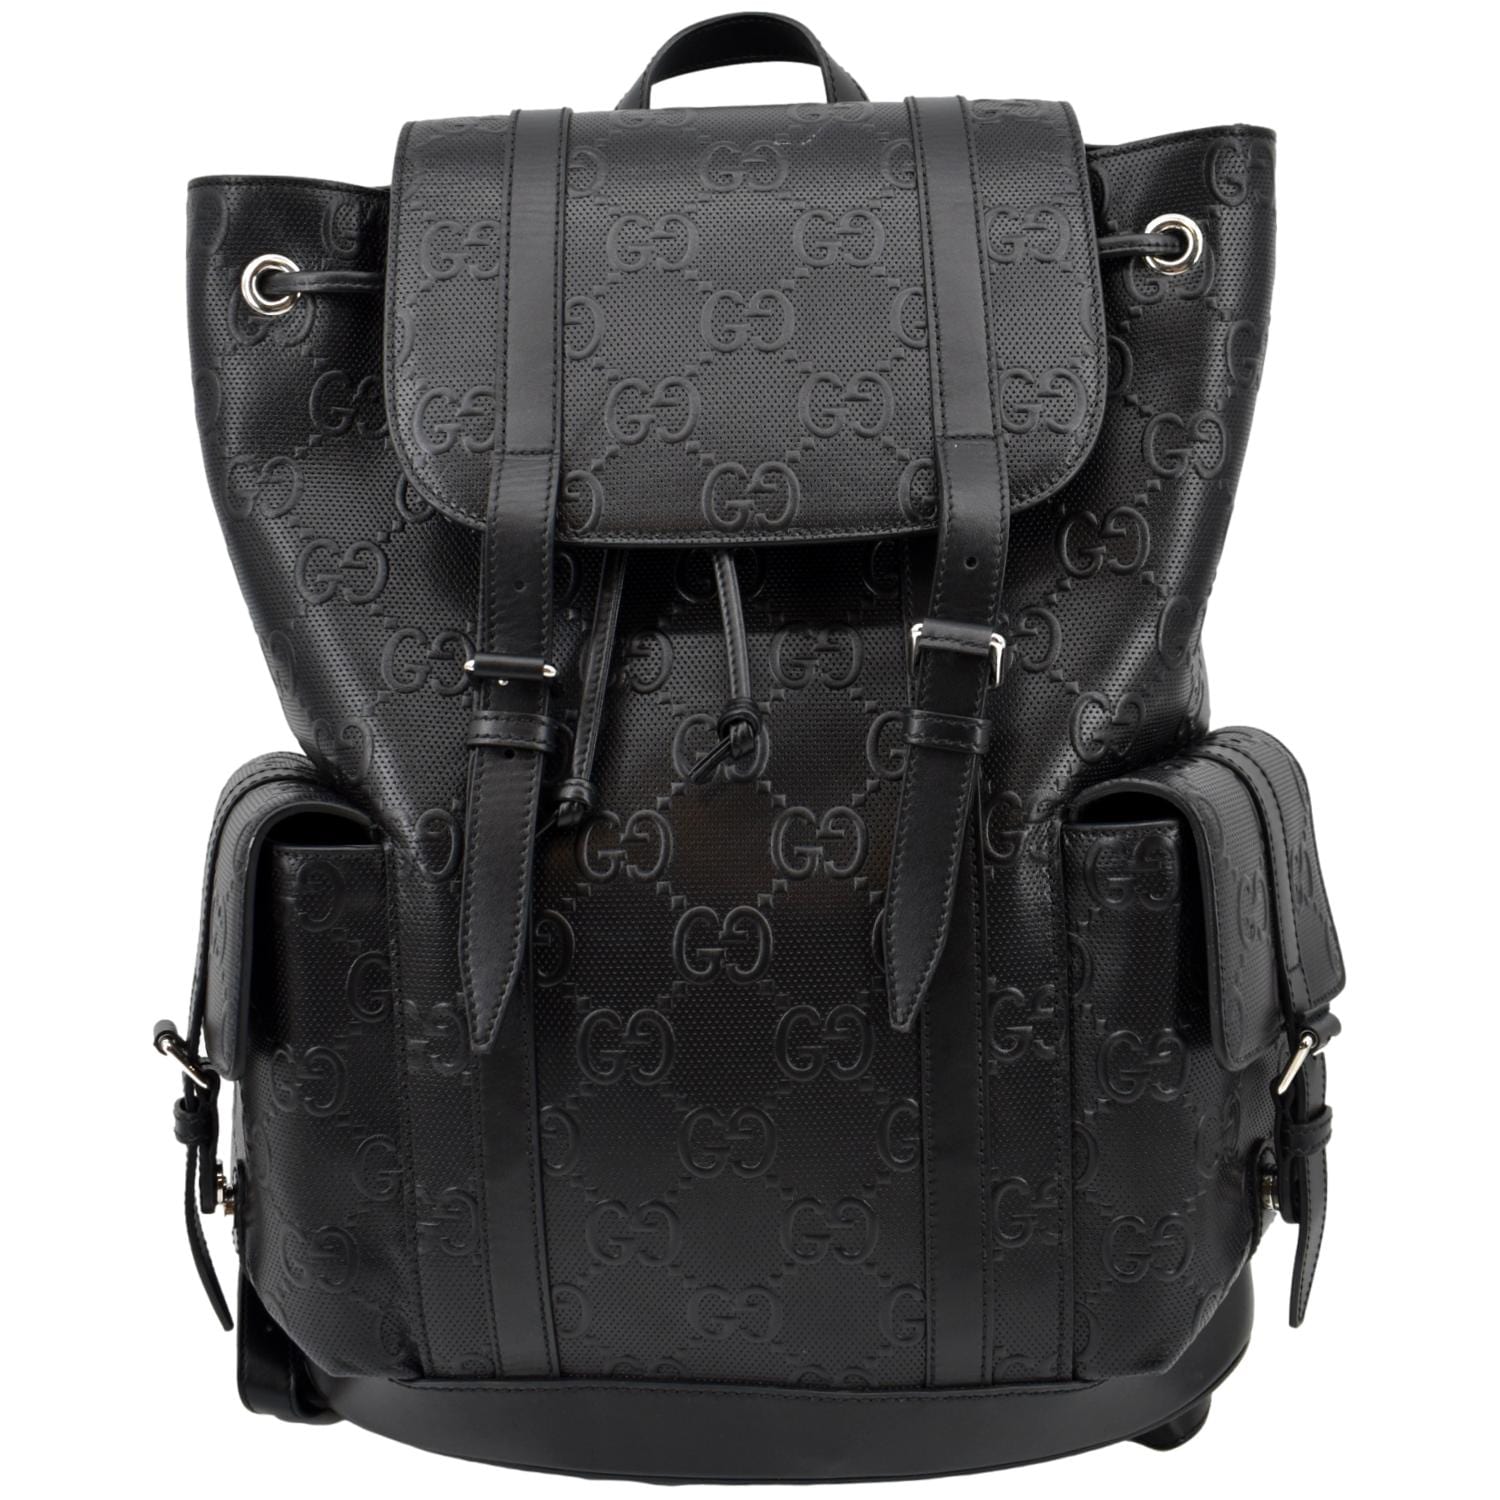 Gucci - With an embossed GG monogram, a leather backpack expresses